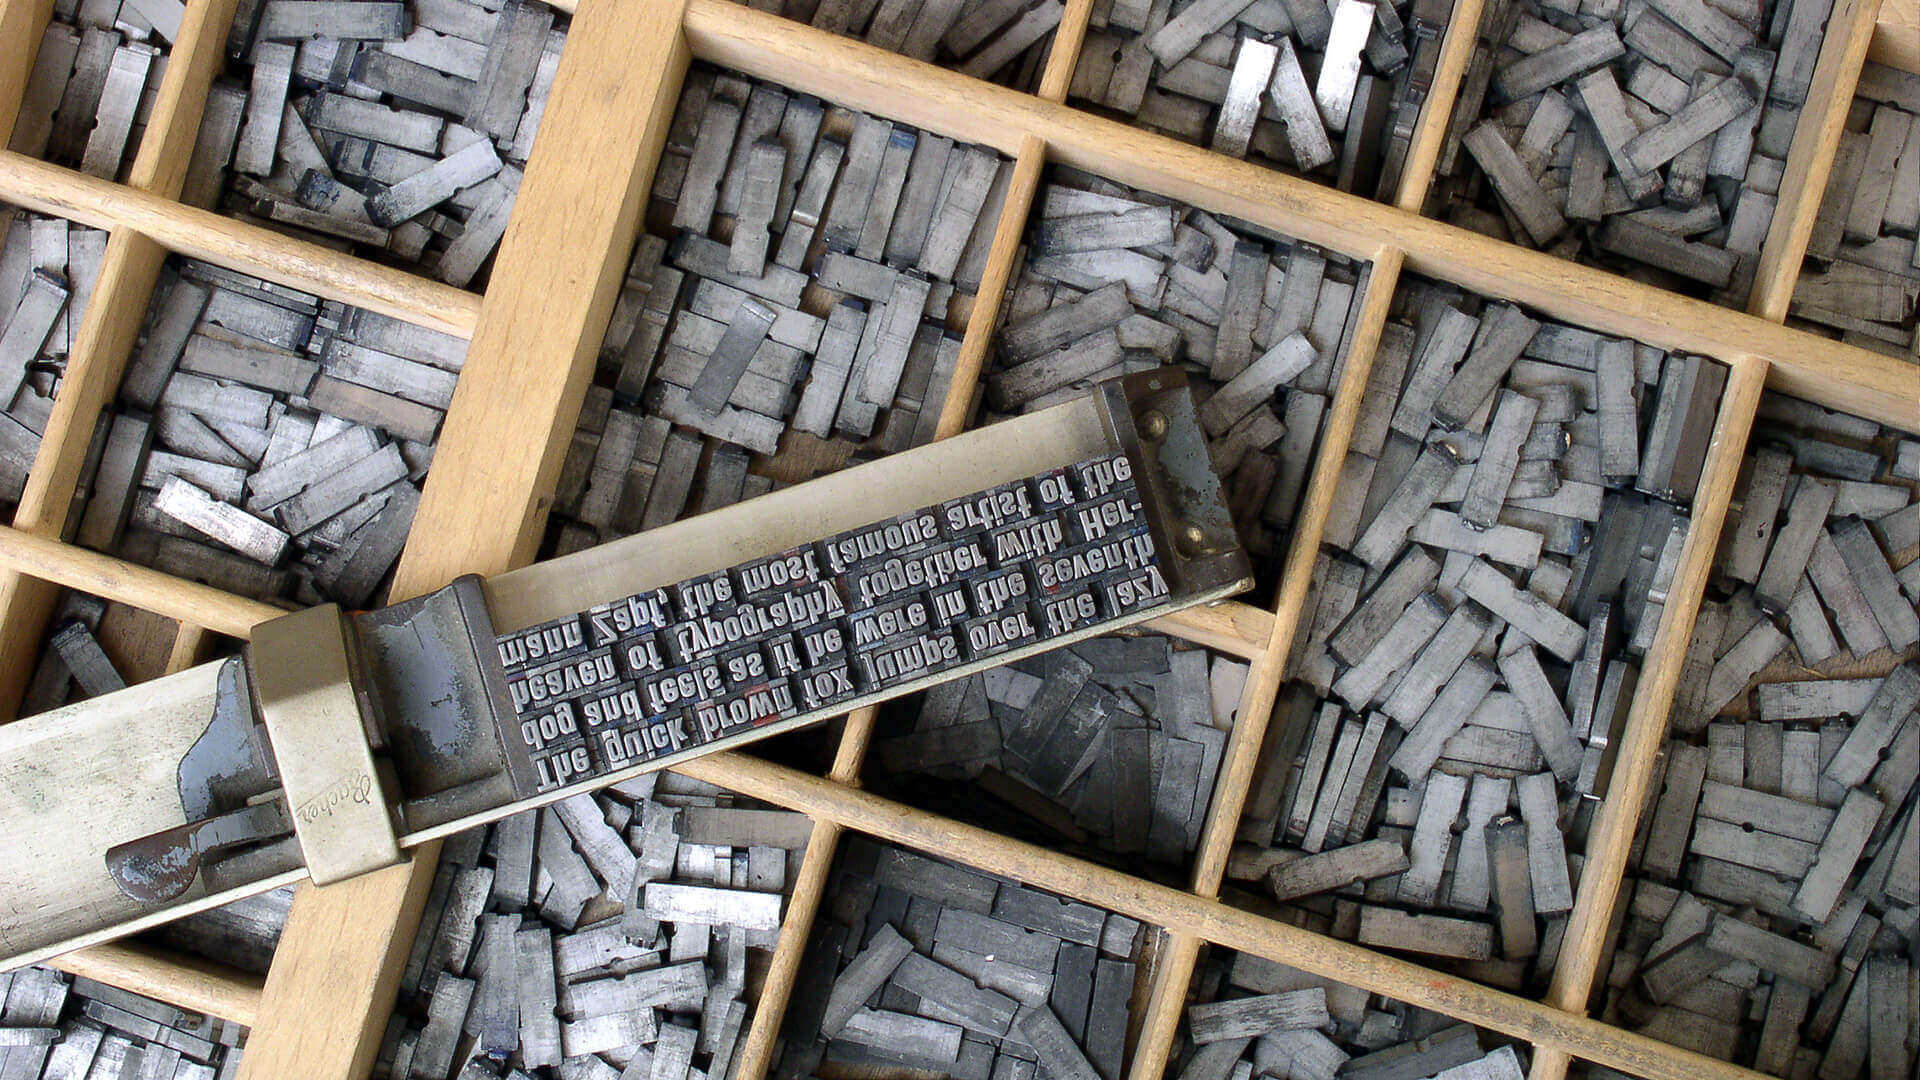 Moveable Type Printing